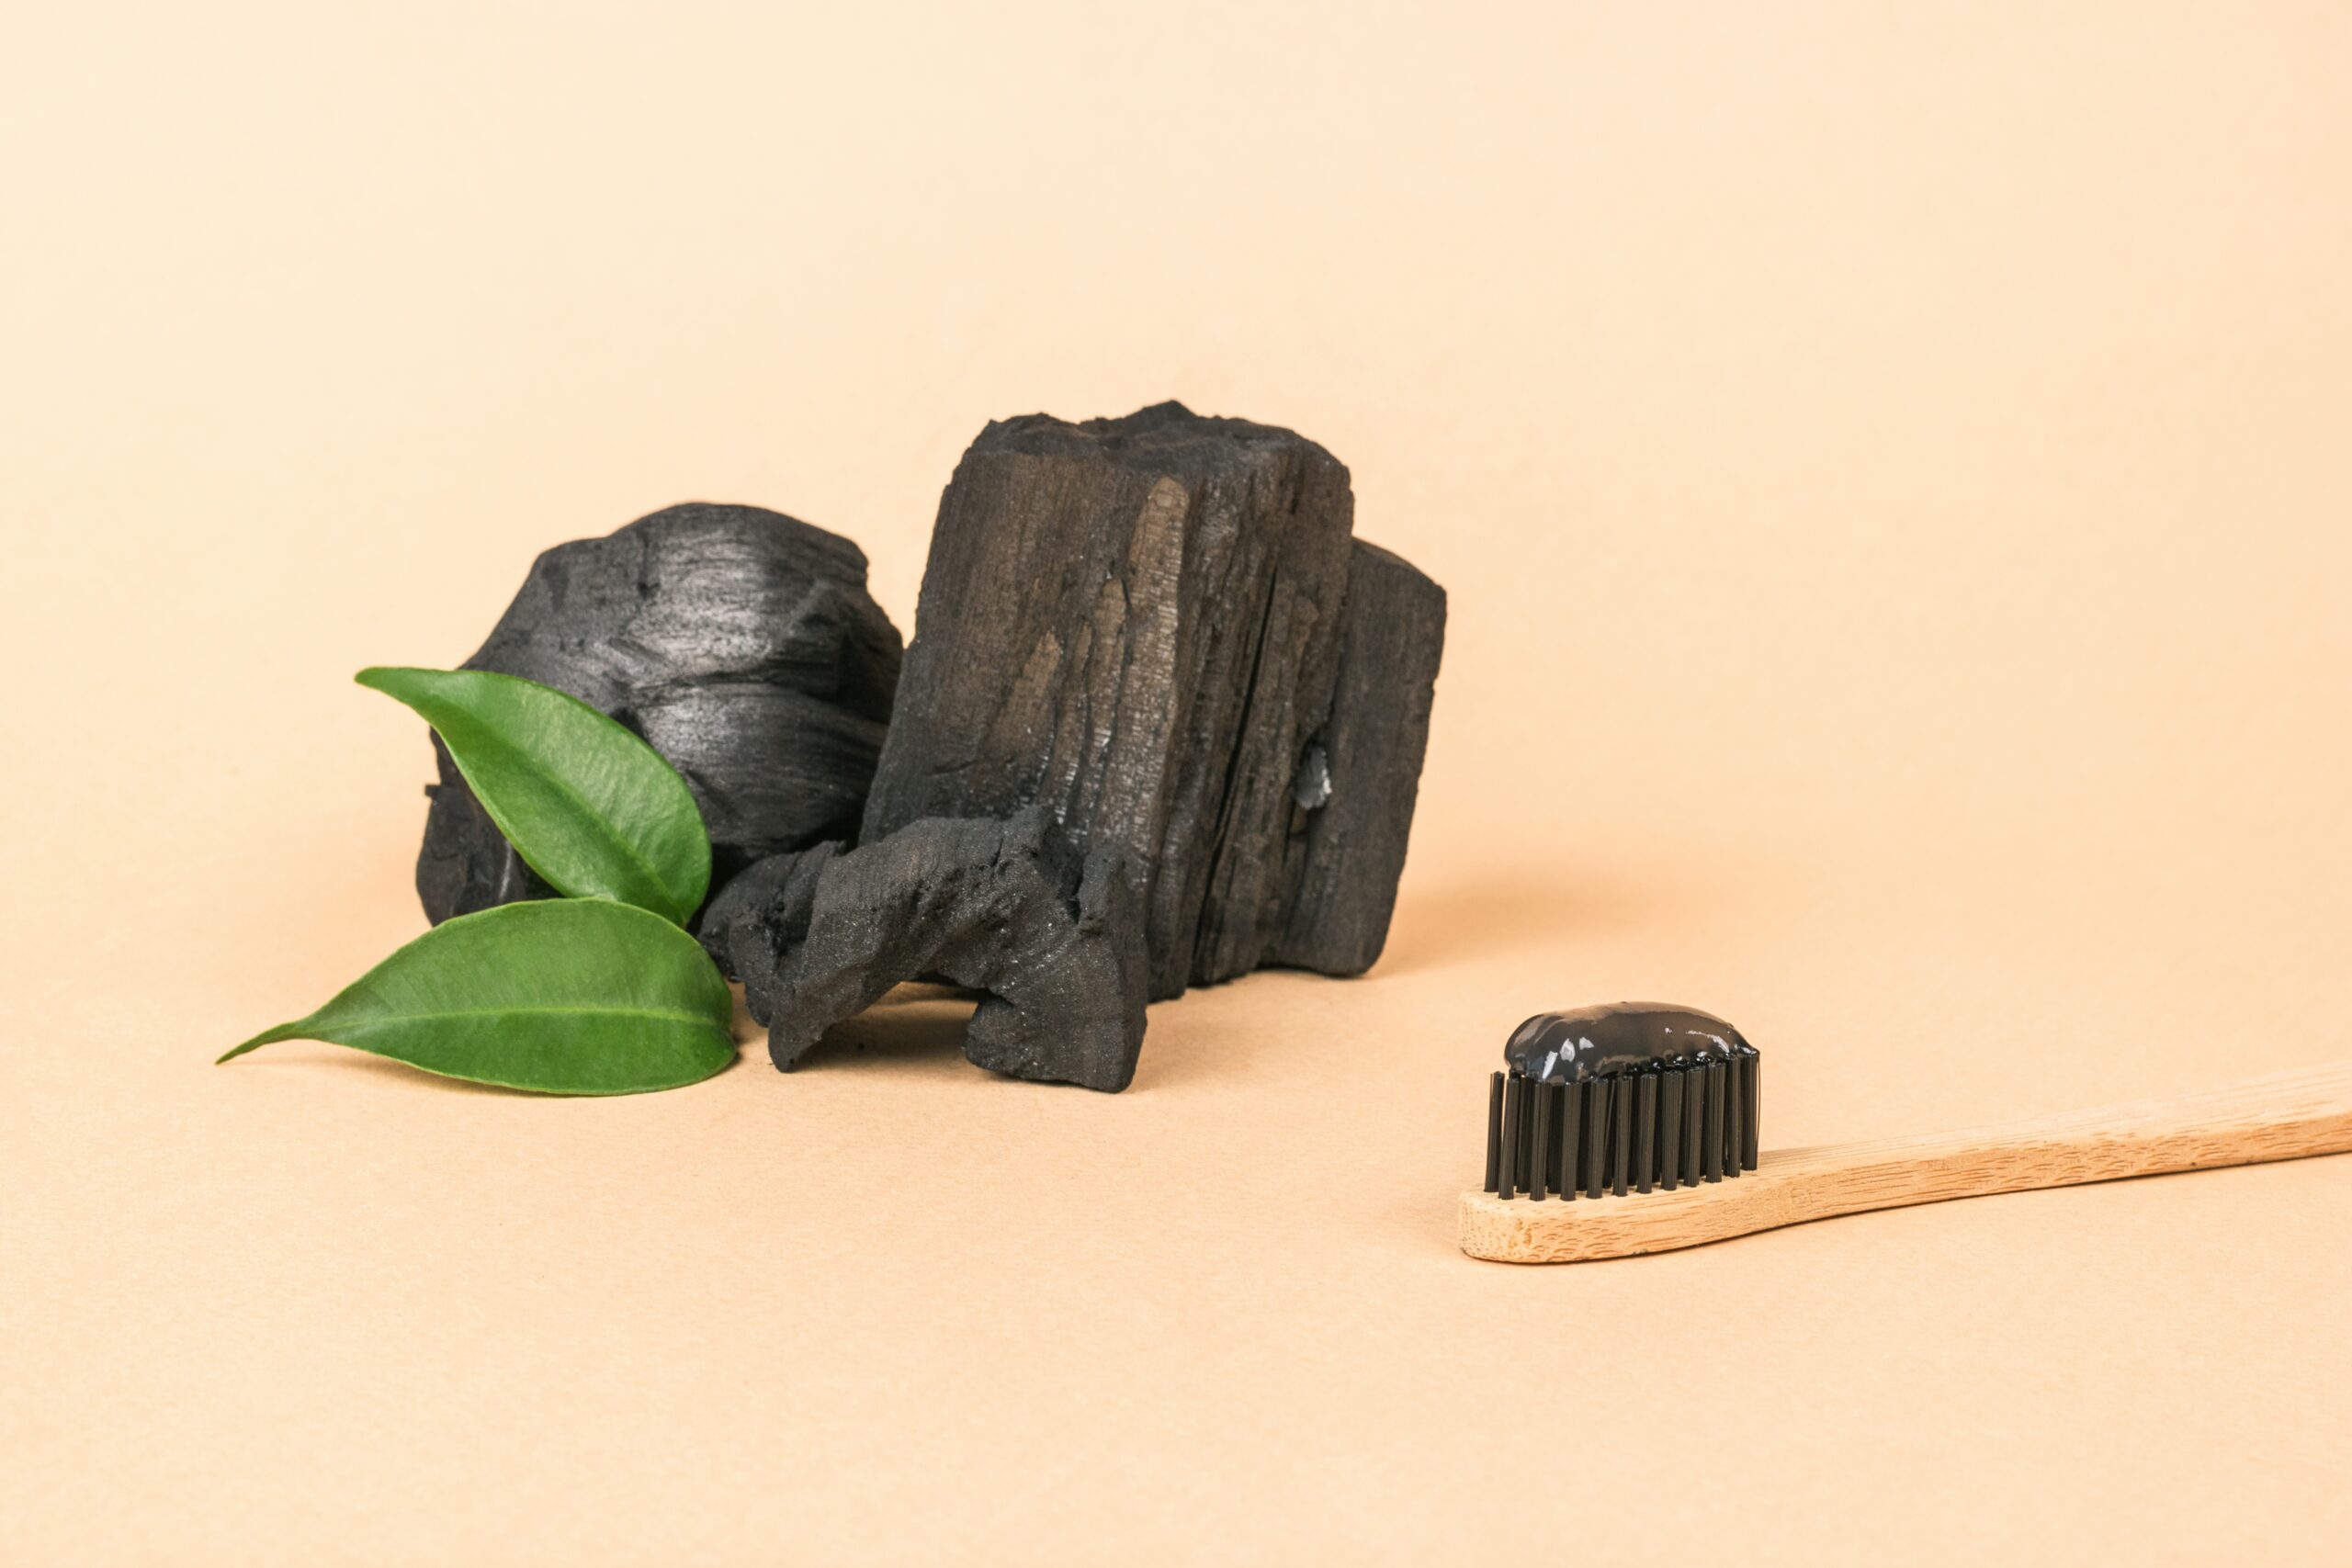 Activated charcoal has become a popular addition to detox plans, including oral detox